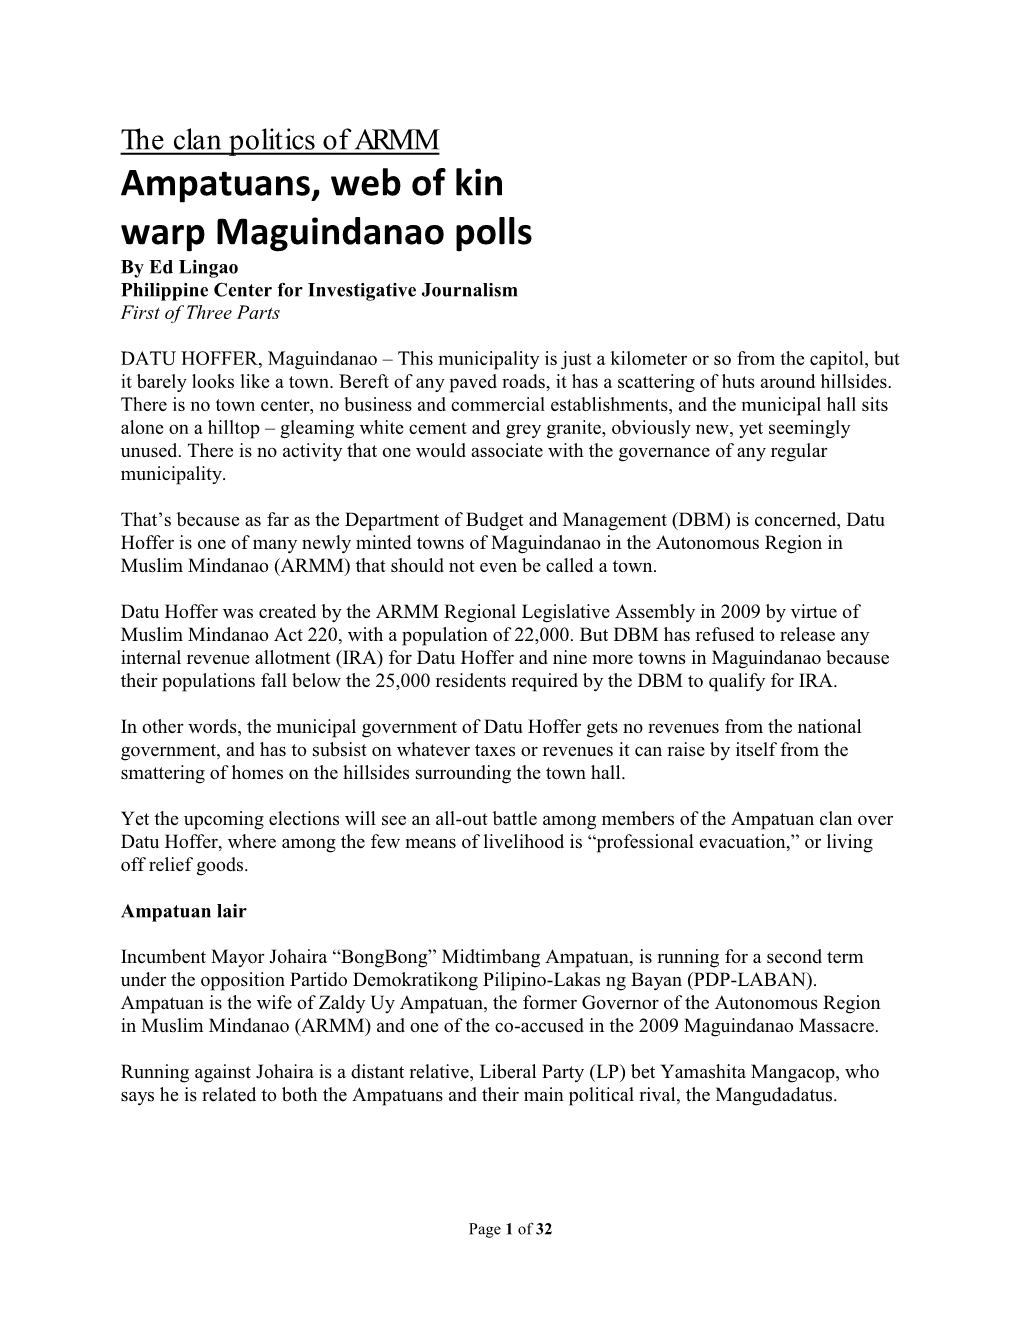 Clan Politics of ARMM Ampatuans, Web of Kin Warp Maguindanao Polls by Ed Lingao Philippine Center for Investigative Journalism First of Three Parts